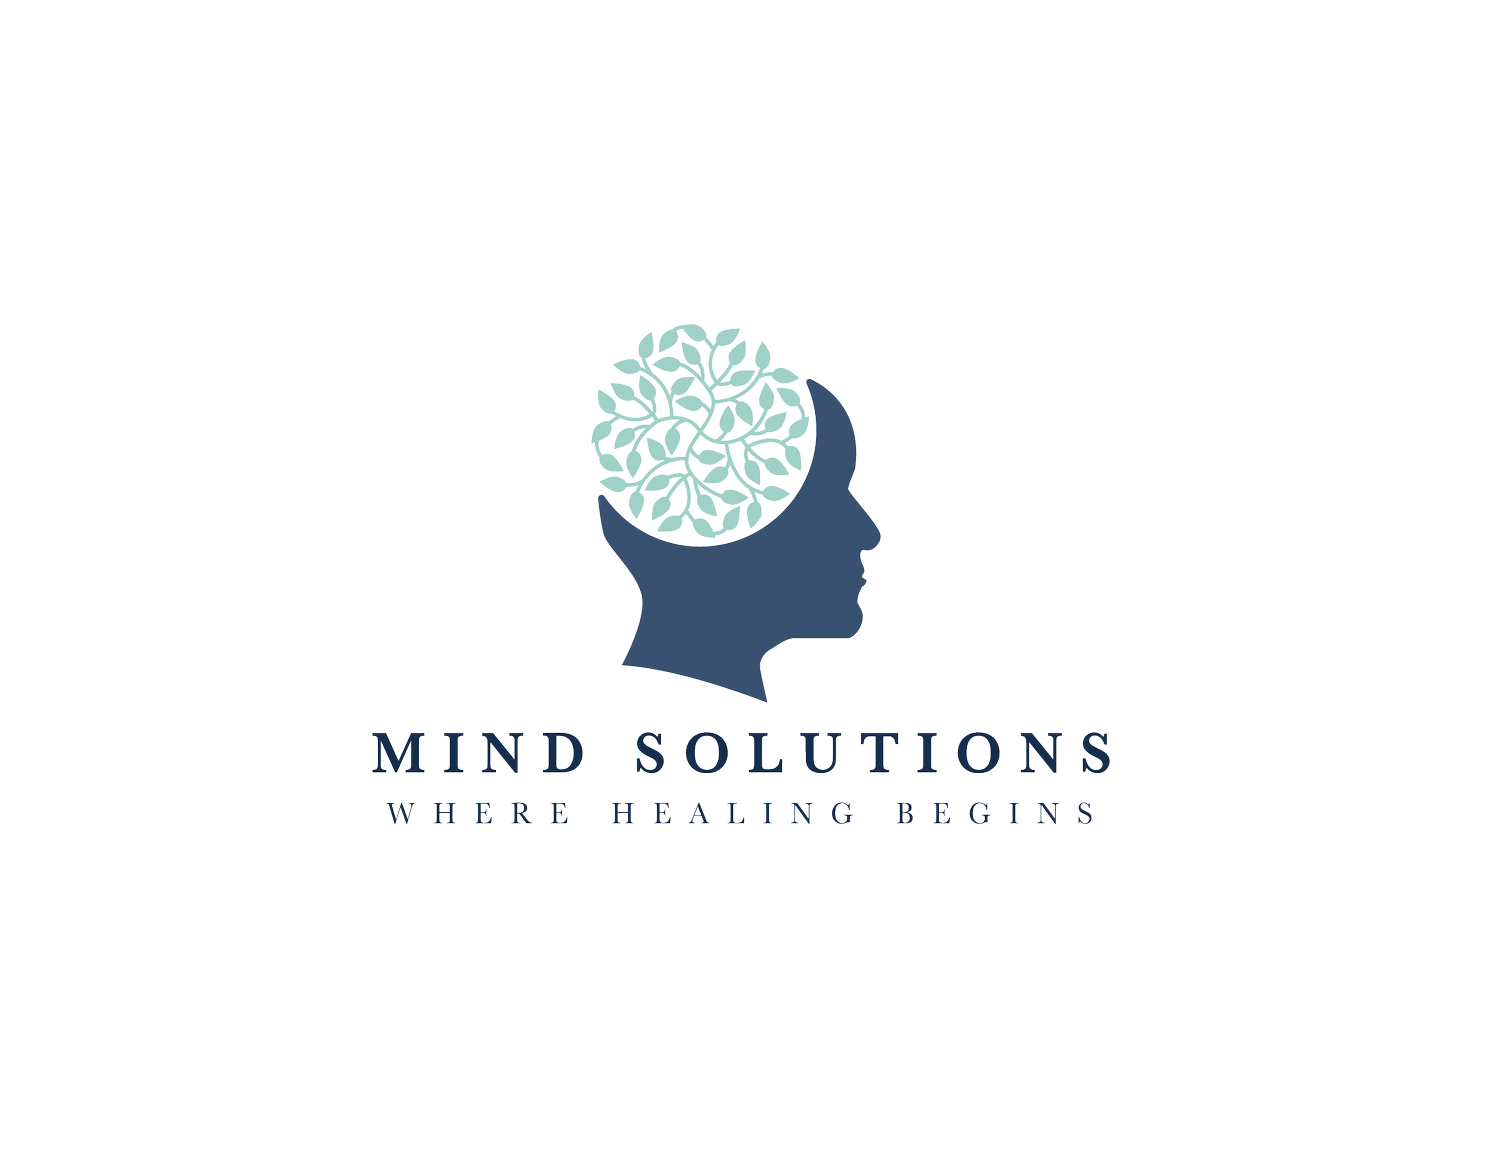 Mind Solutions